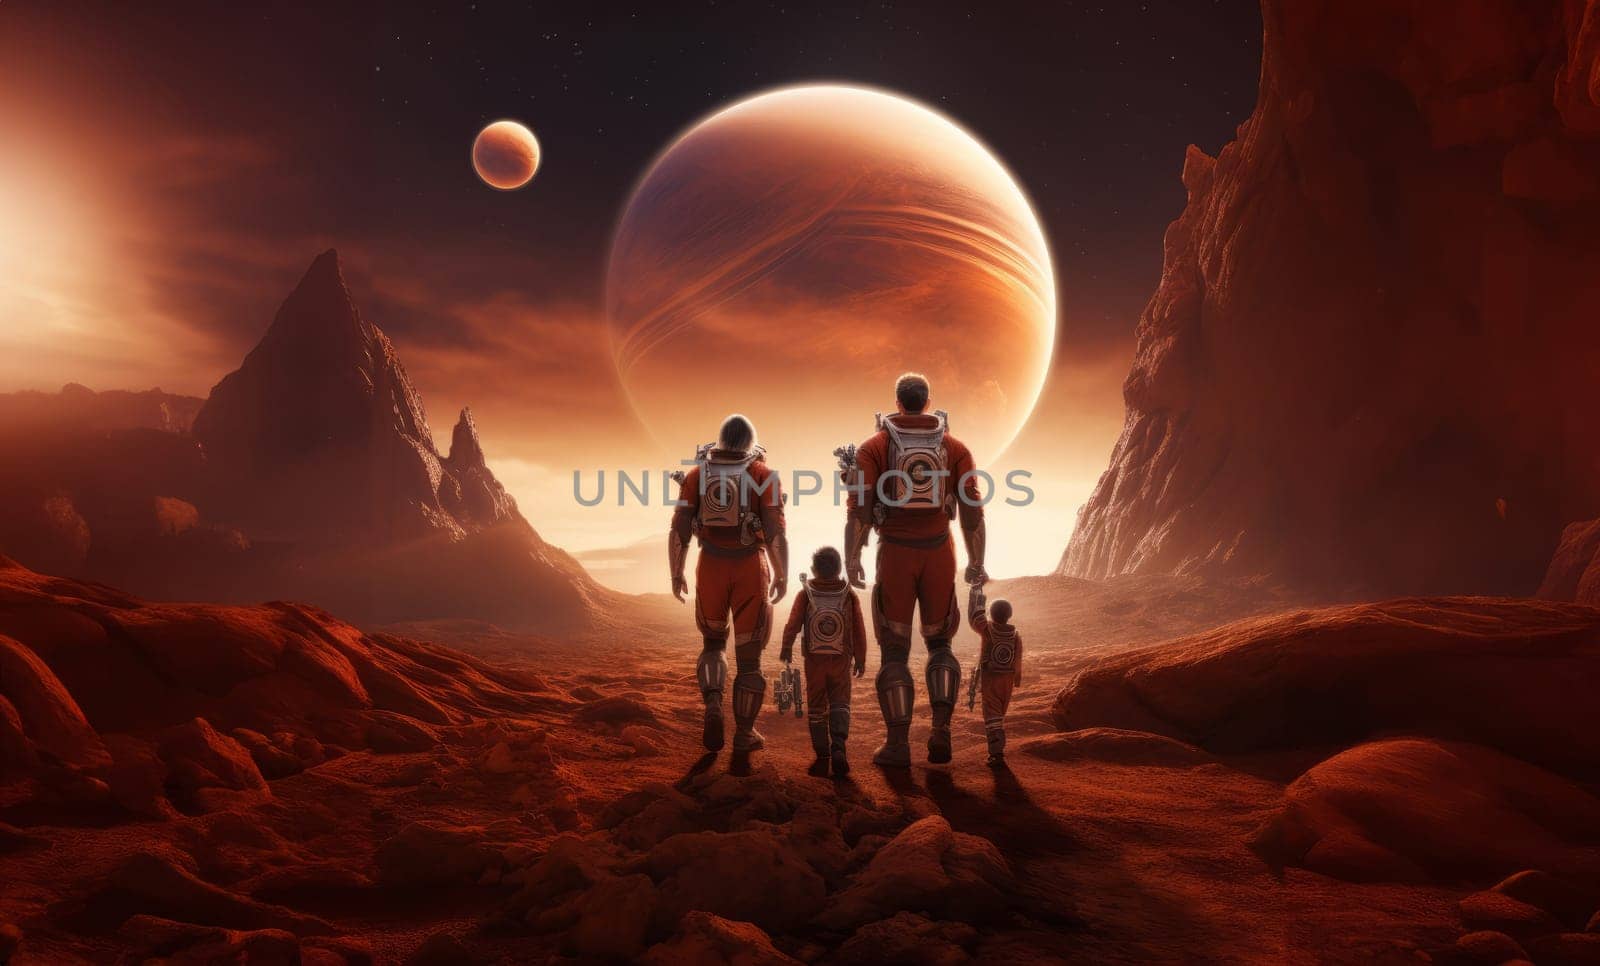 A futuristic, symbolic photograph depicts the beginnings of human civilization on Mars, showing a family walking on the surface of the red planet, evoking themes of exploration, settlement, and the pioneering spirit of humanity's extraterrestrial endeavors.Generated image by dotshock